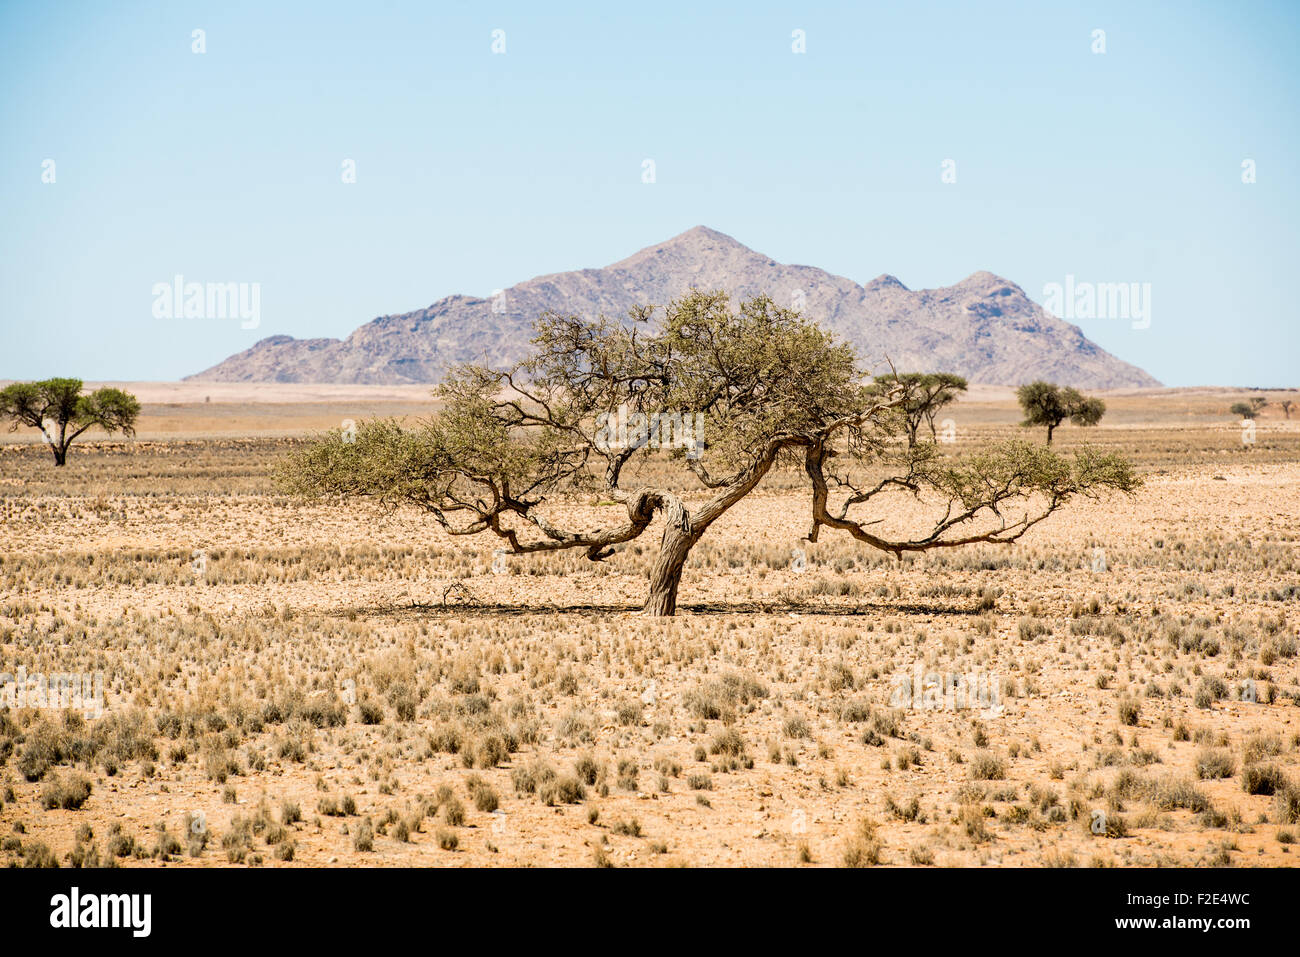 Tree growing in the desert with a mountain directly behind it in Namibia, Africa Stock Photo